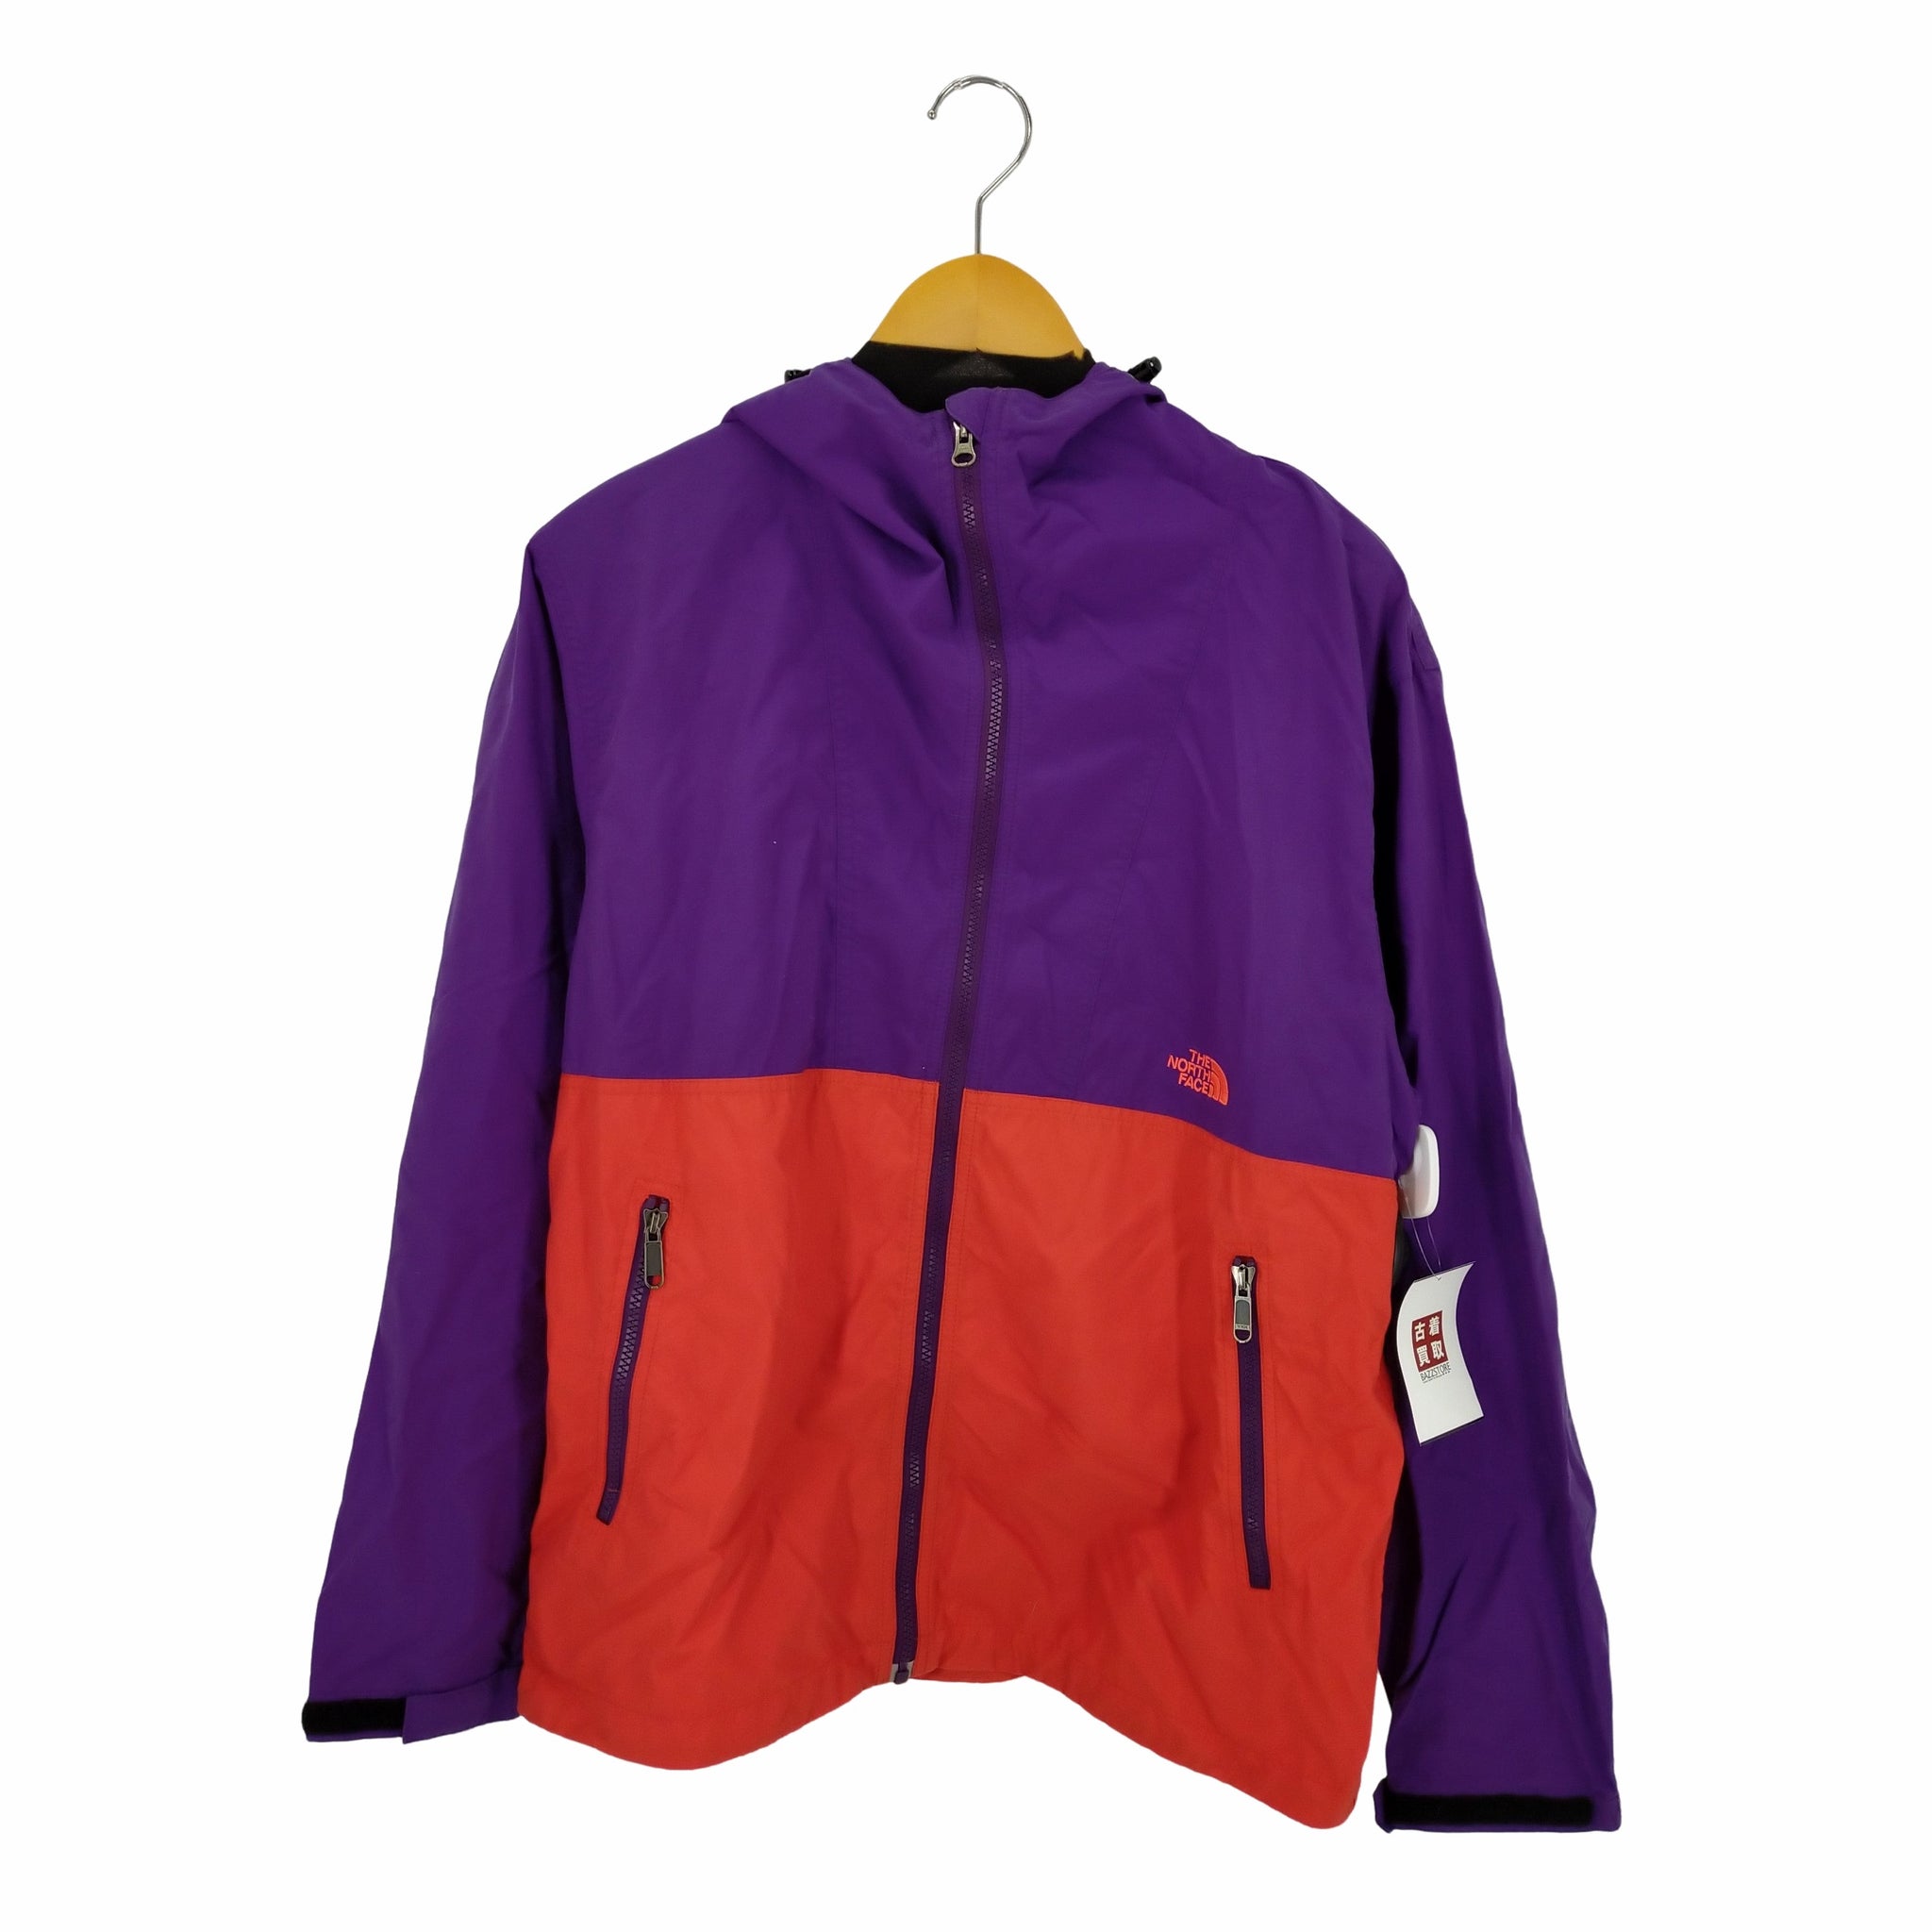 THE NORTH FACE(ザノースフェイス)COMPACT JACKET